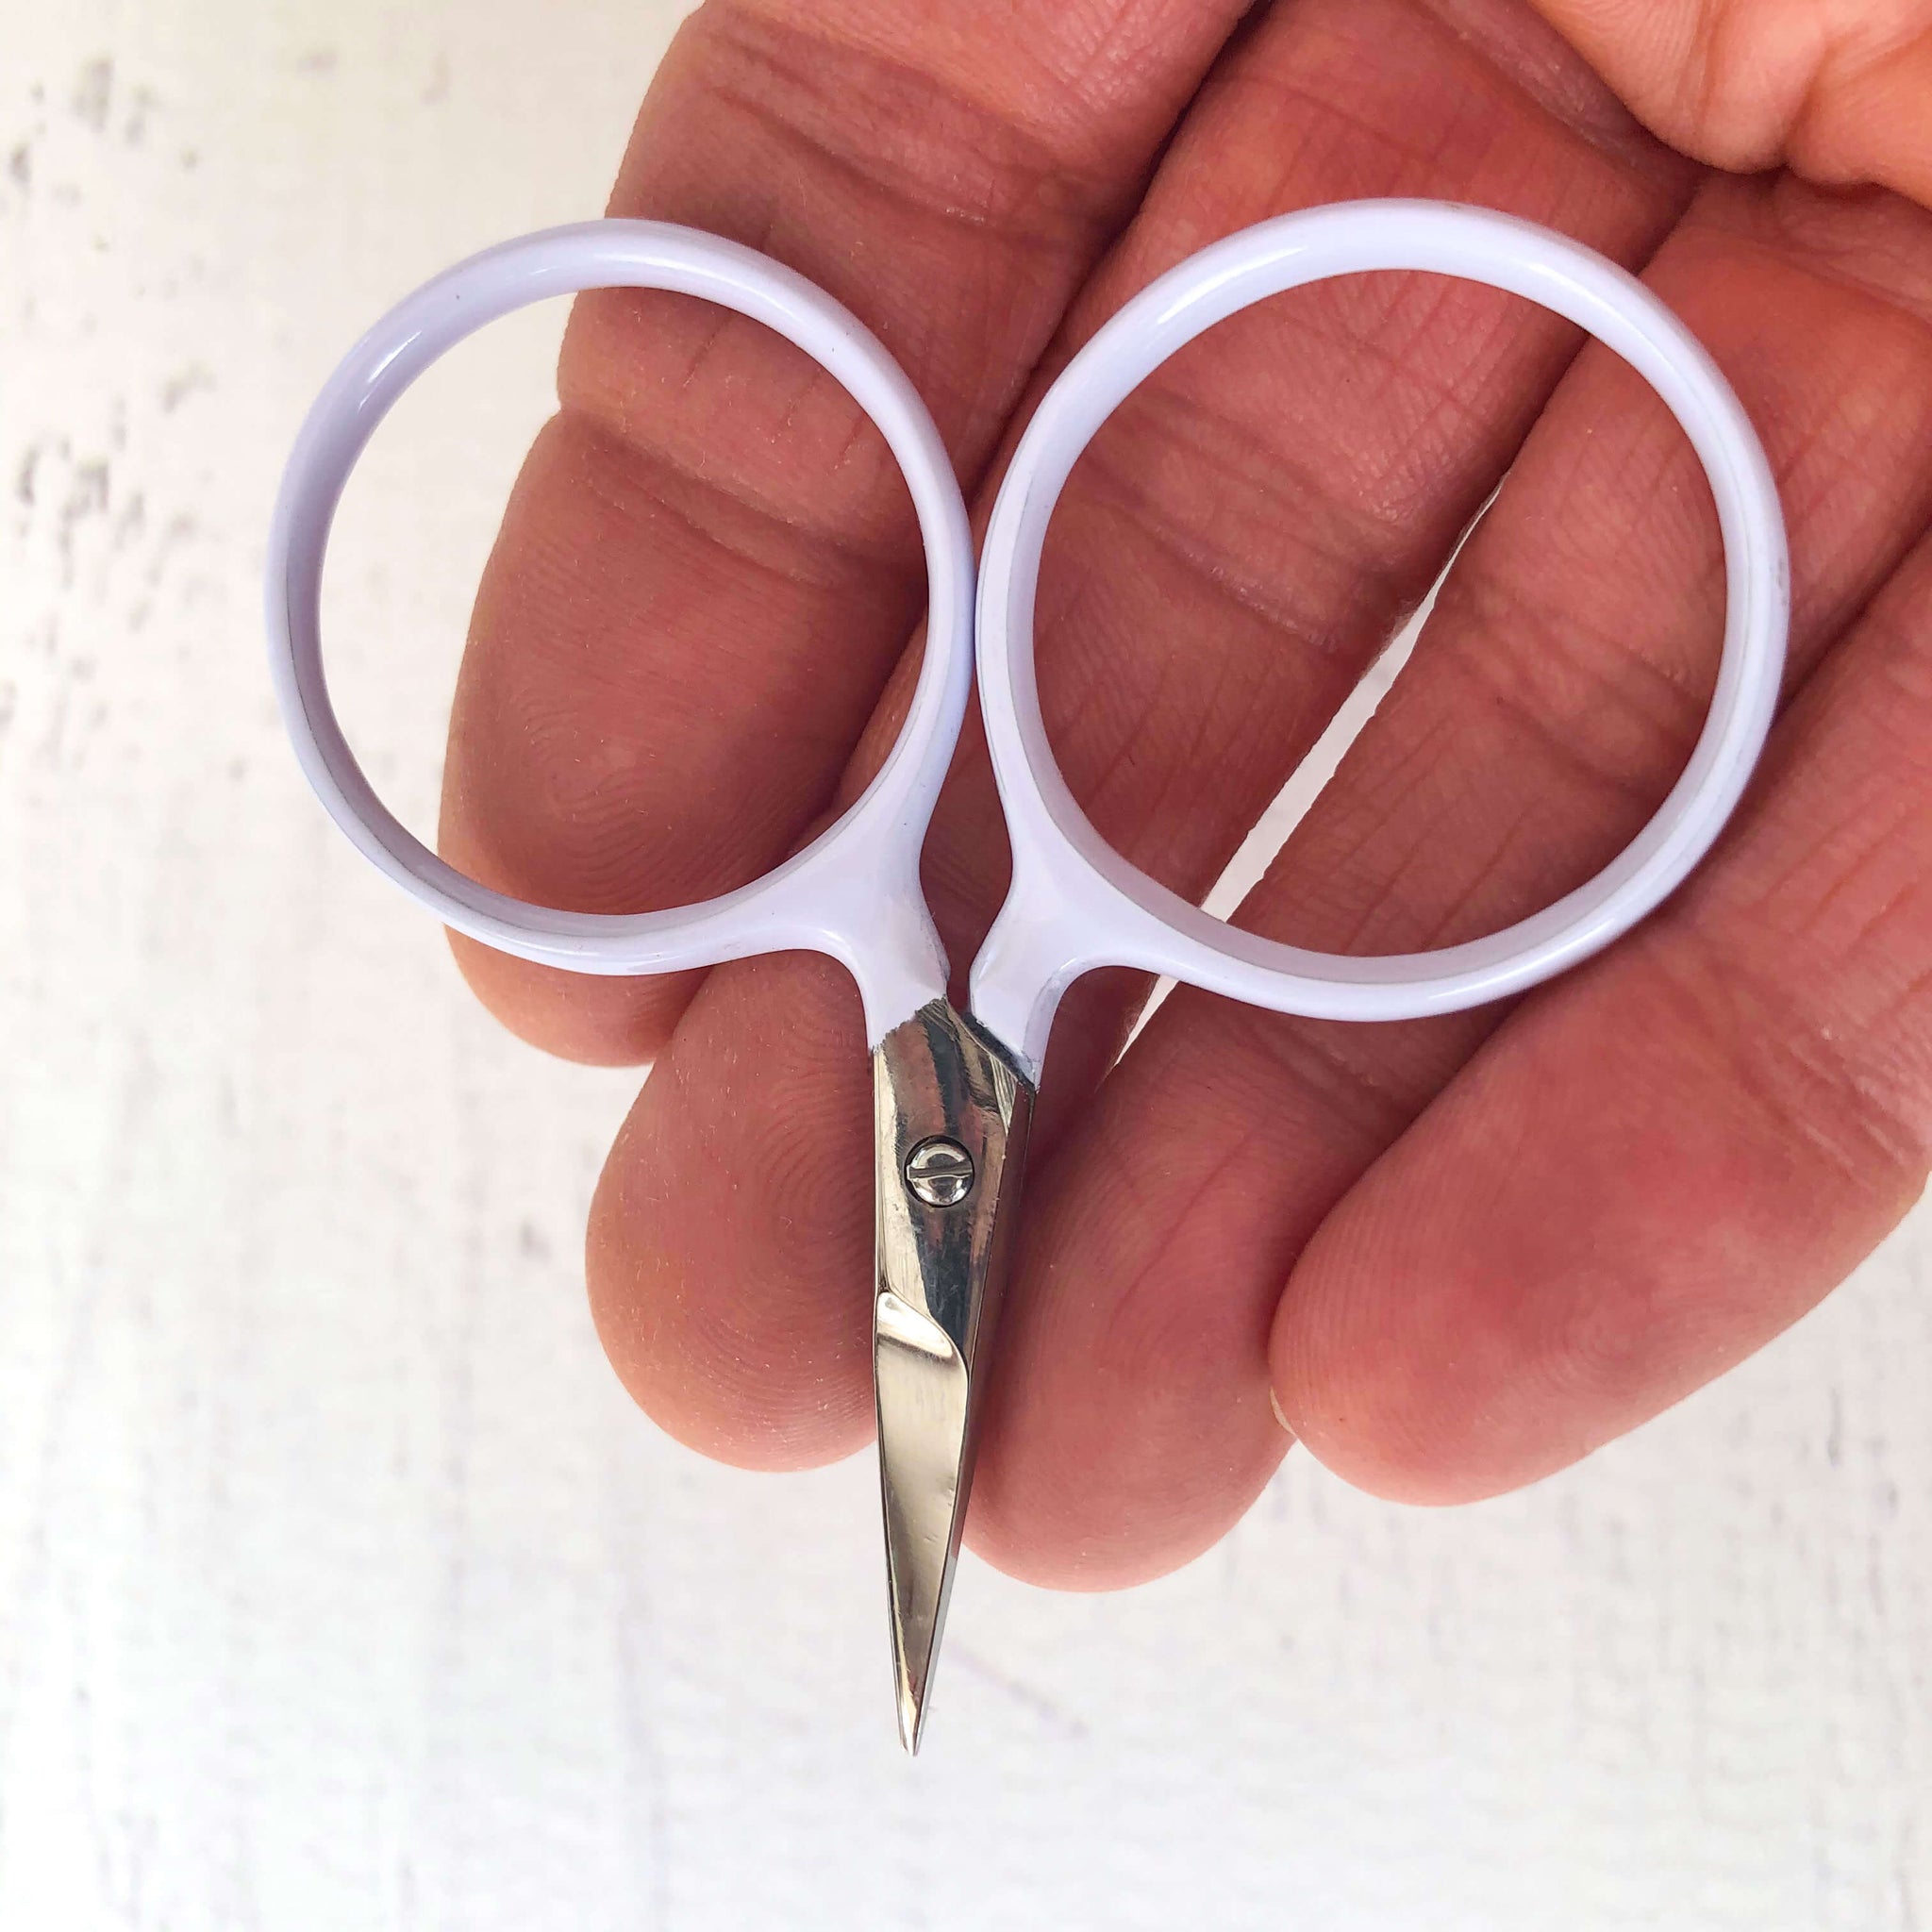 Premax Embroidery Scissors - The Creativity Patch - Lucy Jennings